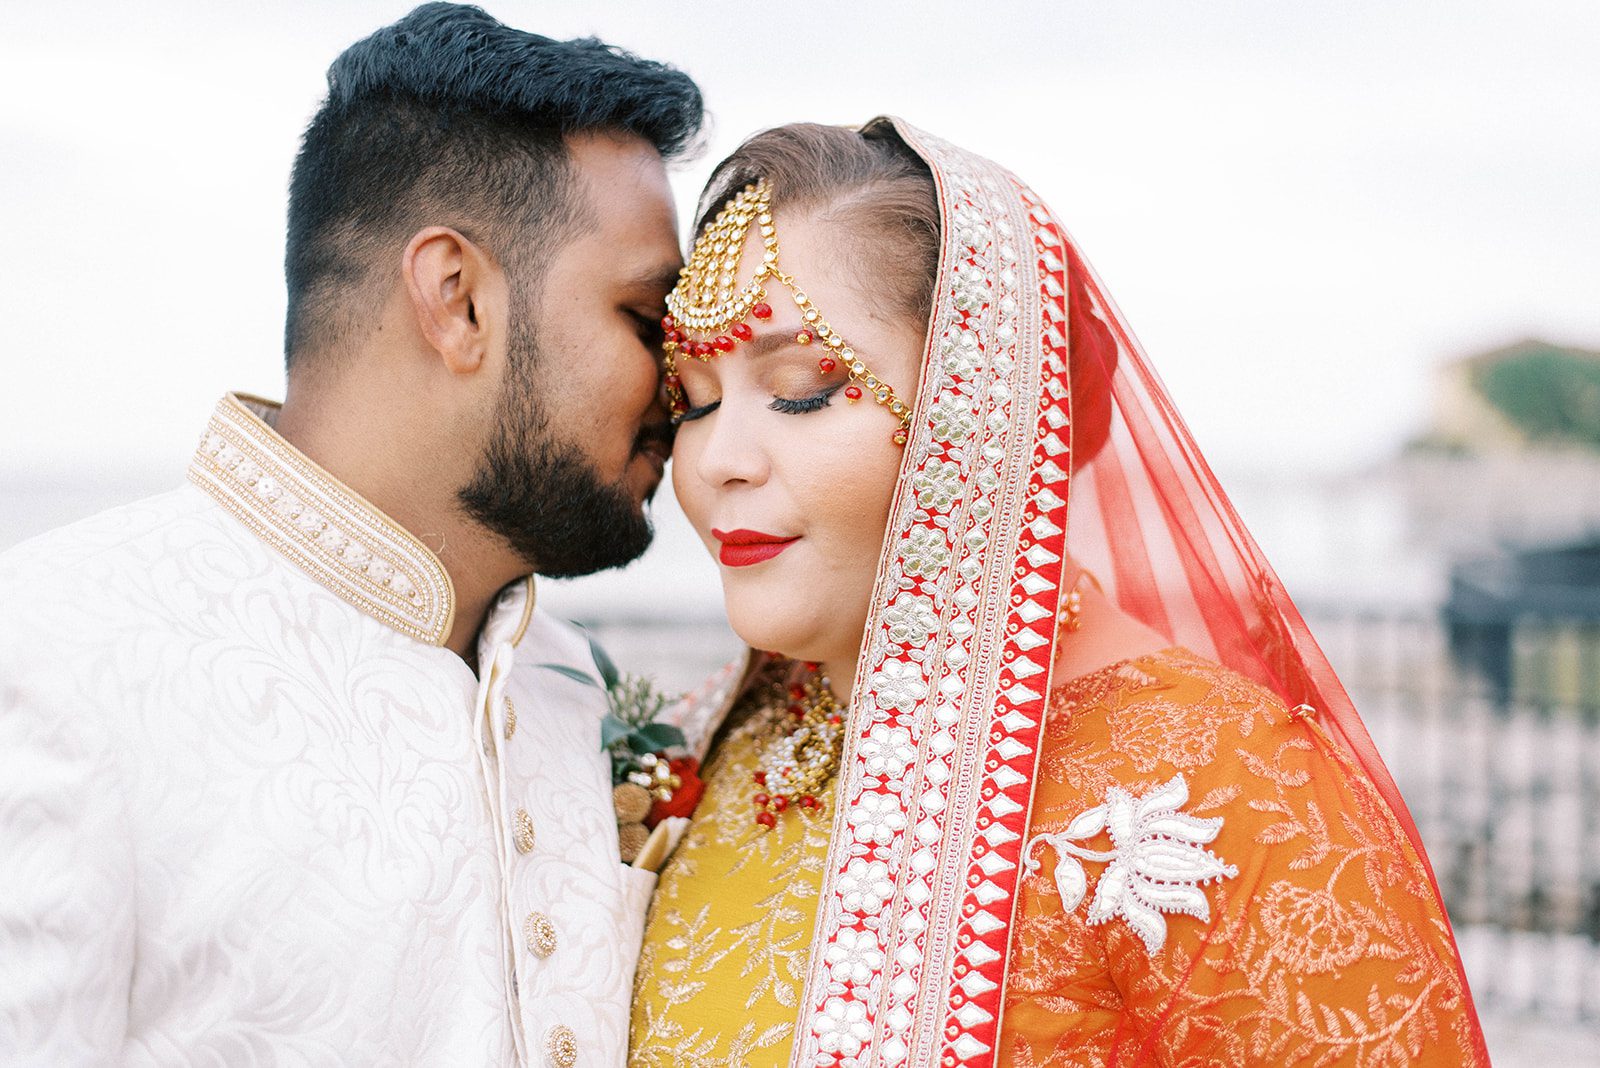 Indian wedding with man holding close his bride as she smiles while wearing her traditional wedding saree in Tampa Florida